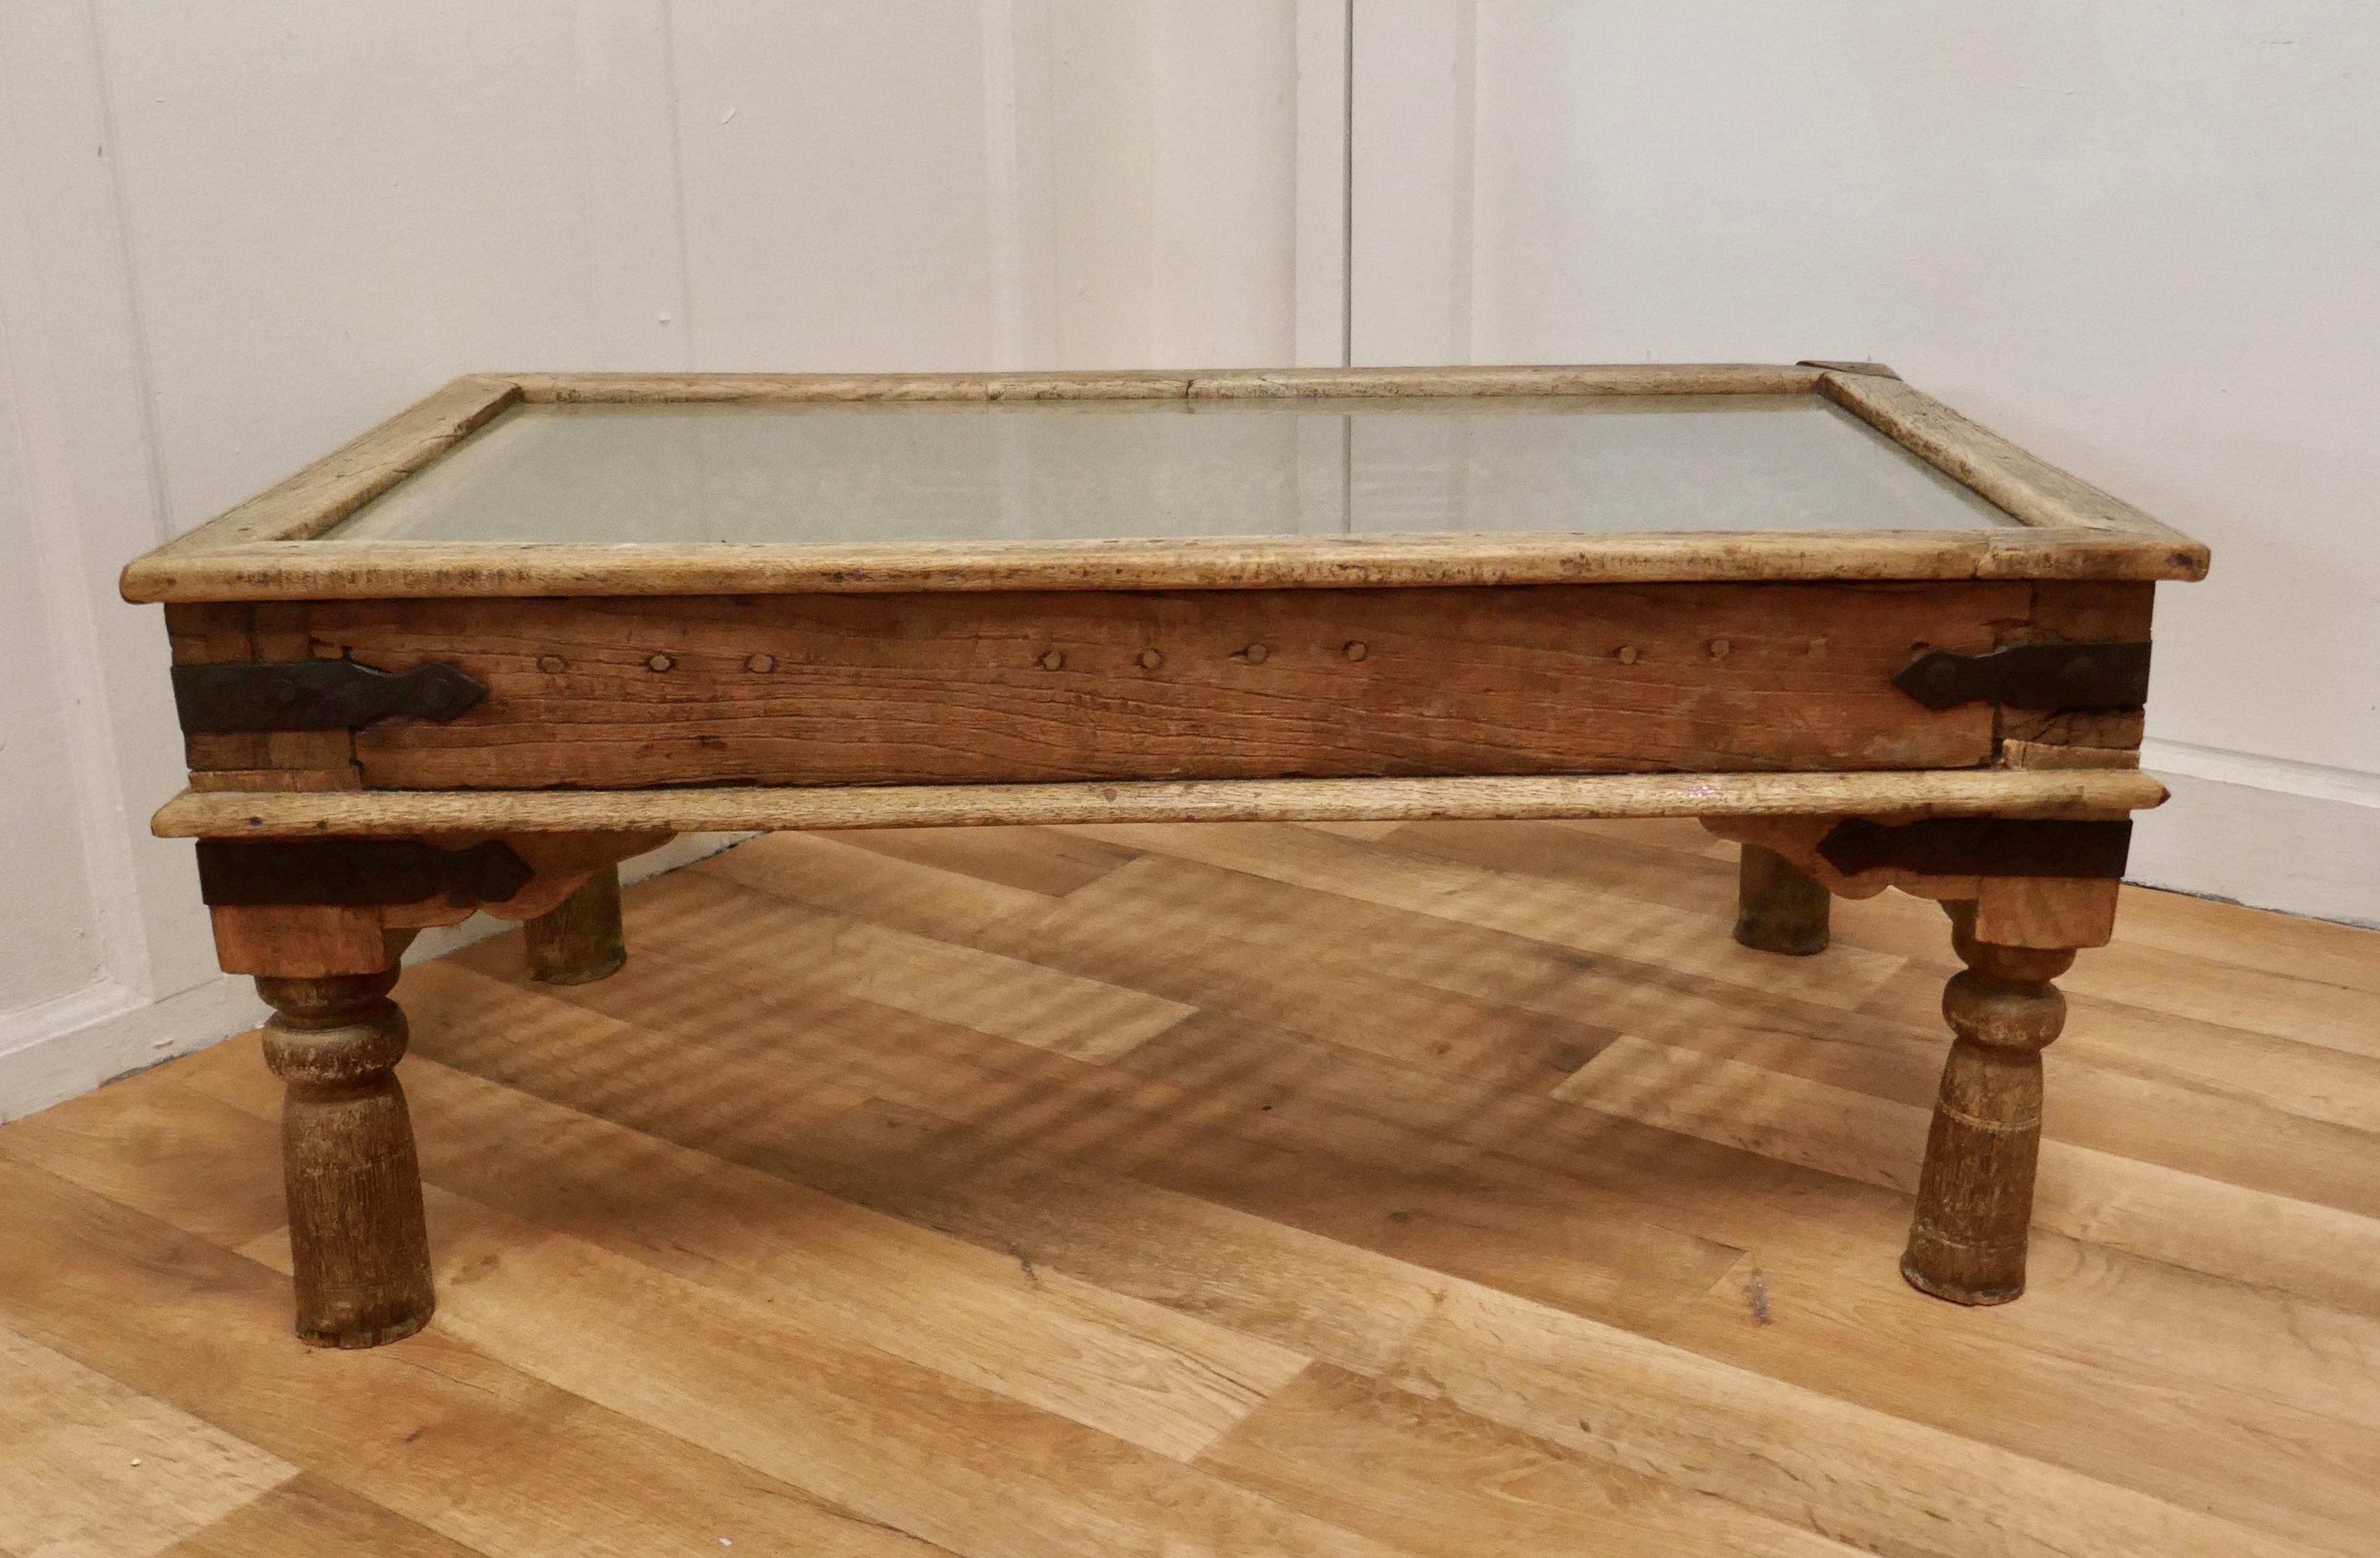 A heavy North African coffee table with inset iron grill

This is an unusual Piece made from a 19th Century Heavy Door. The table has a solid wood frame made from a door panel that has the decorative Wrought Iron security panel included in the